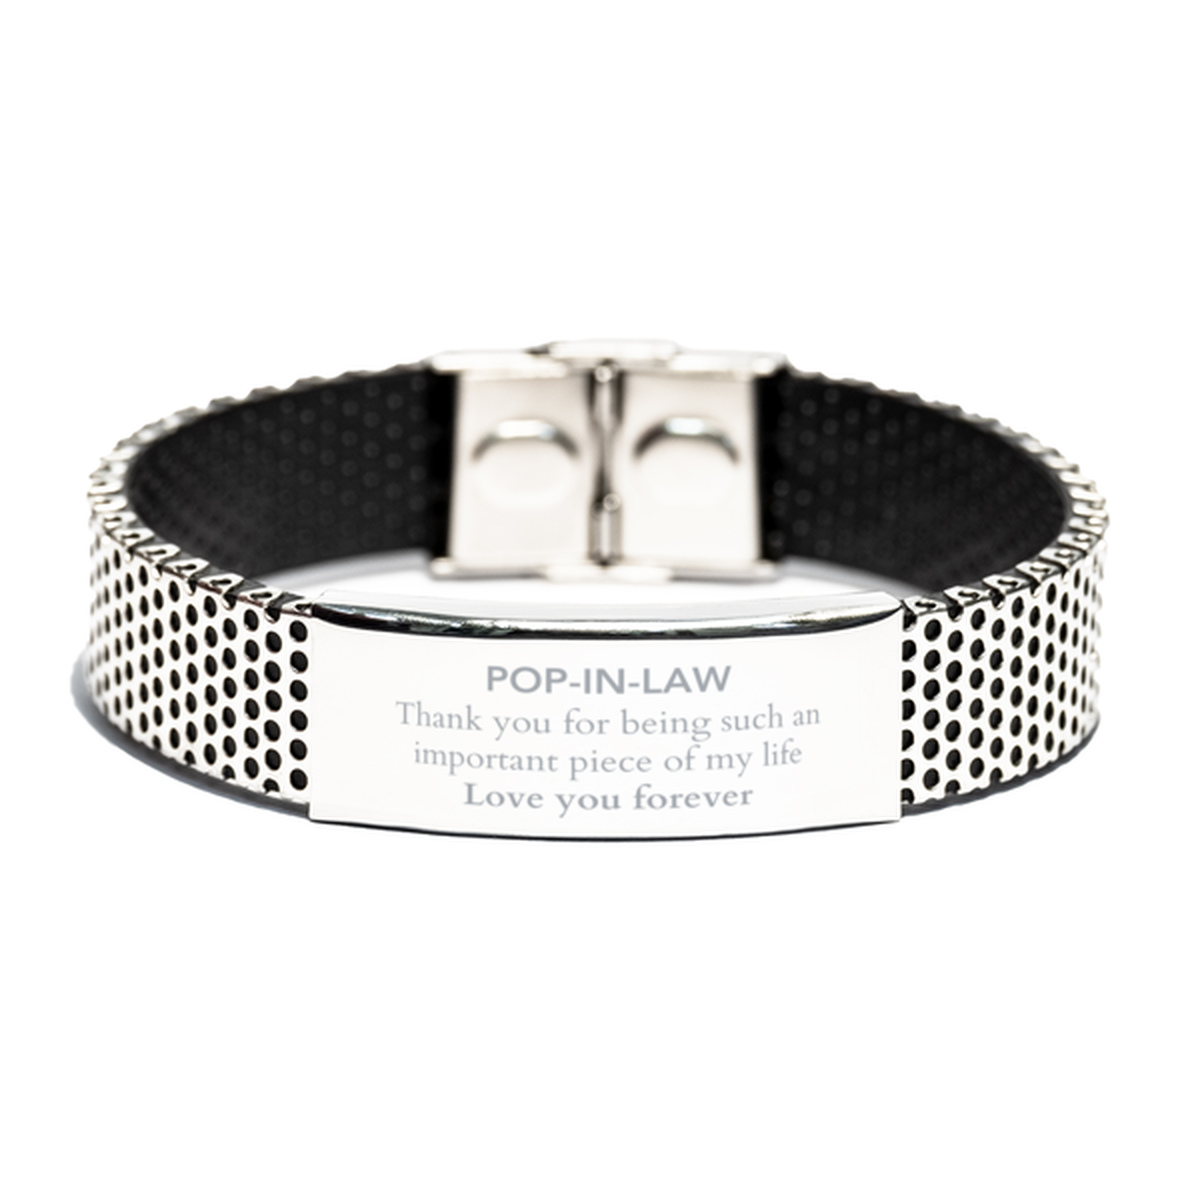 Appropriate Pop-in-law Stainless Steel Bracelet Epic Birthday Gifts for Pop-in-law Thank you for being such an important piece of my life Pop-in-law Christmas Mothers Fathers Day